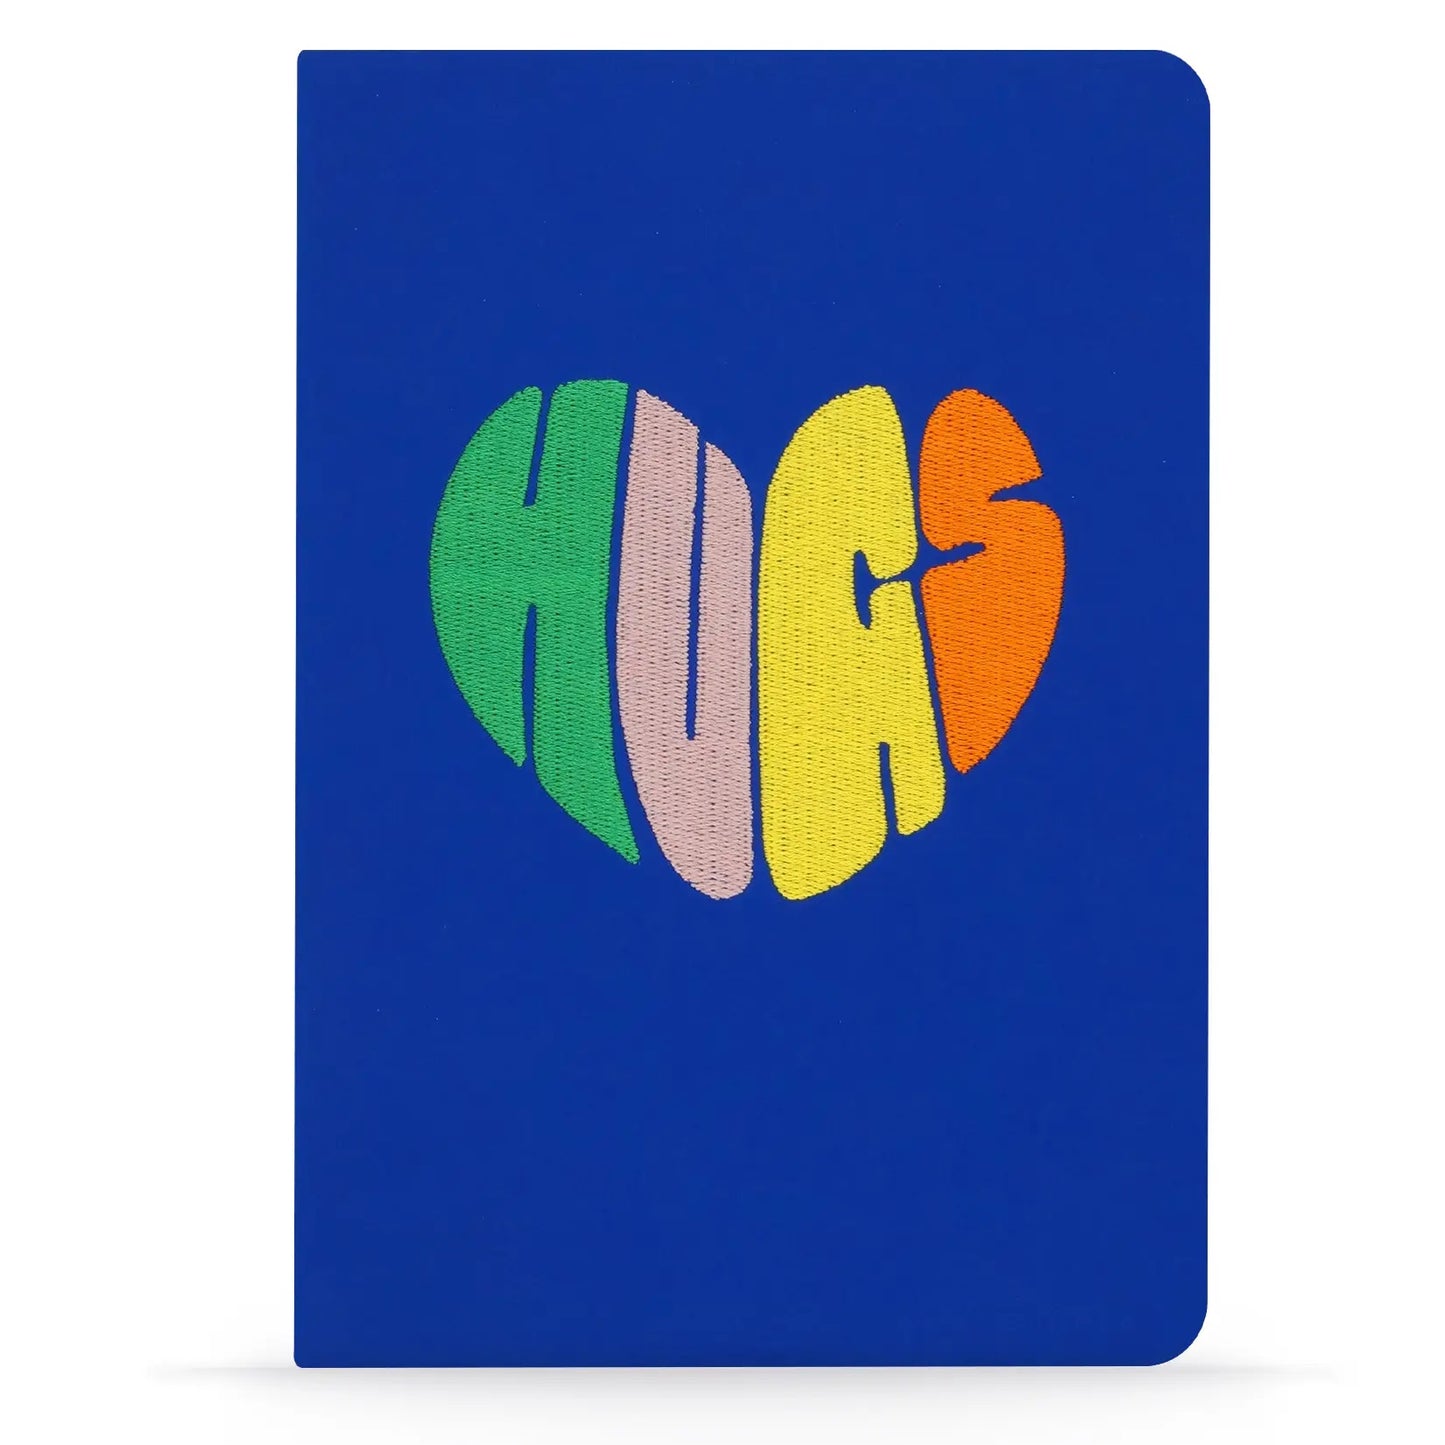 Hugs Embroidered Journal